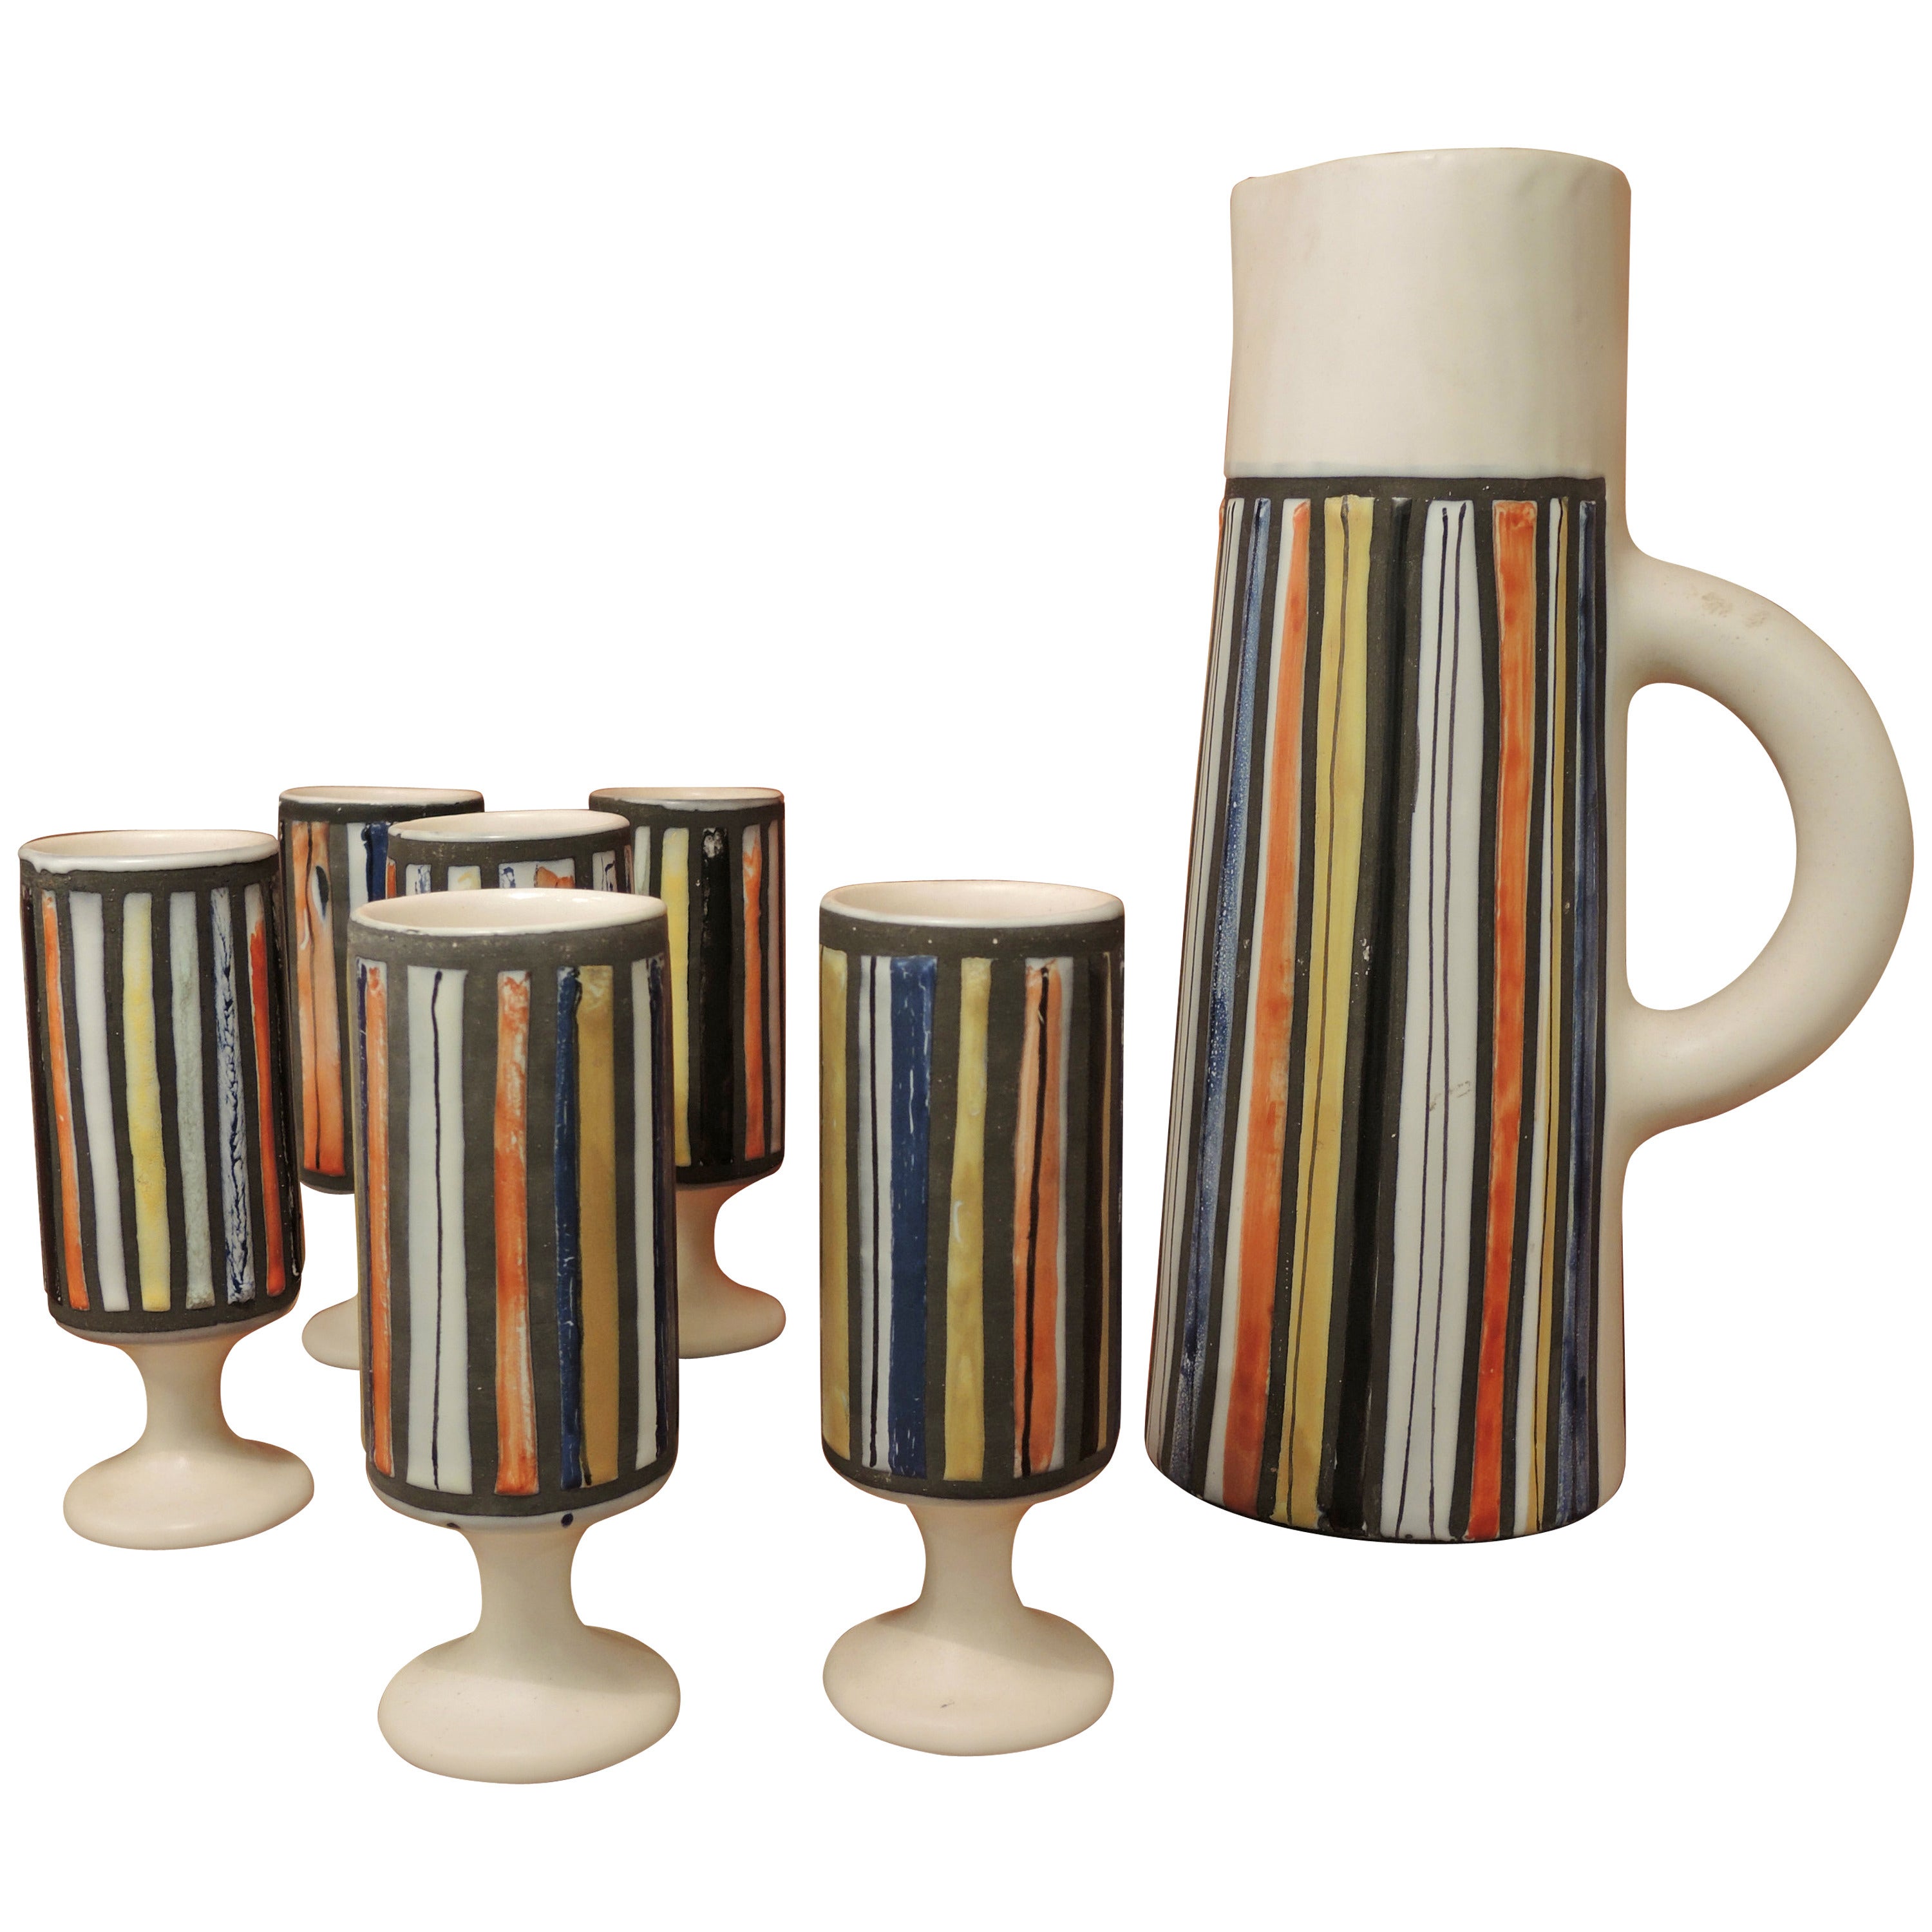 Pitcher and cups by Roger Capron